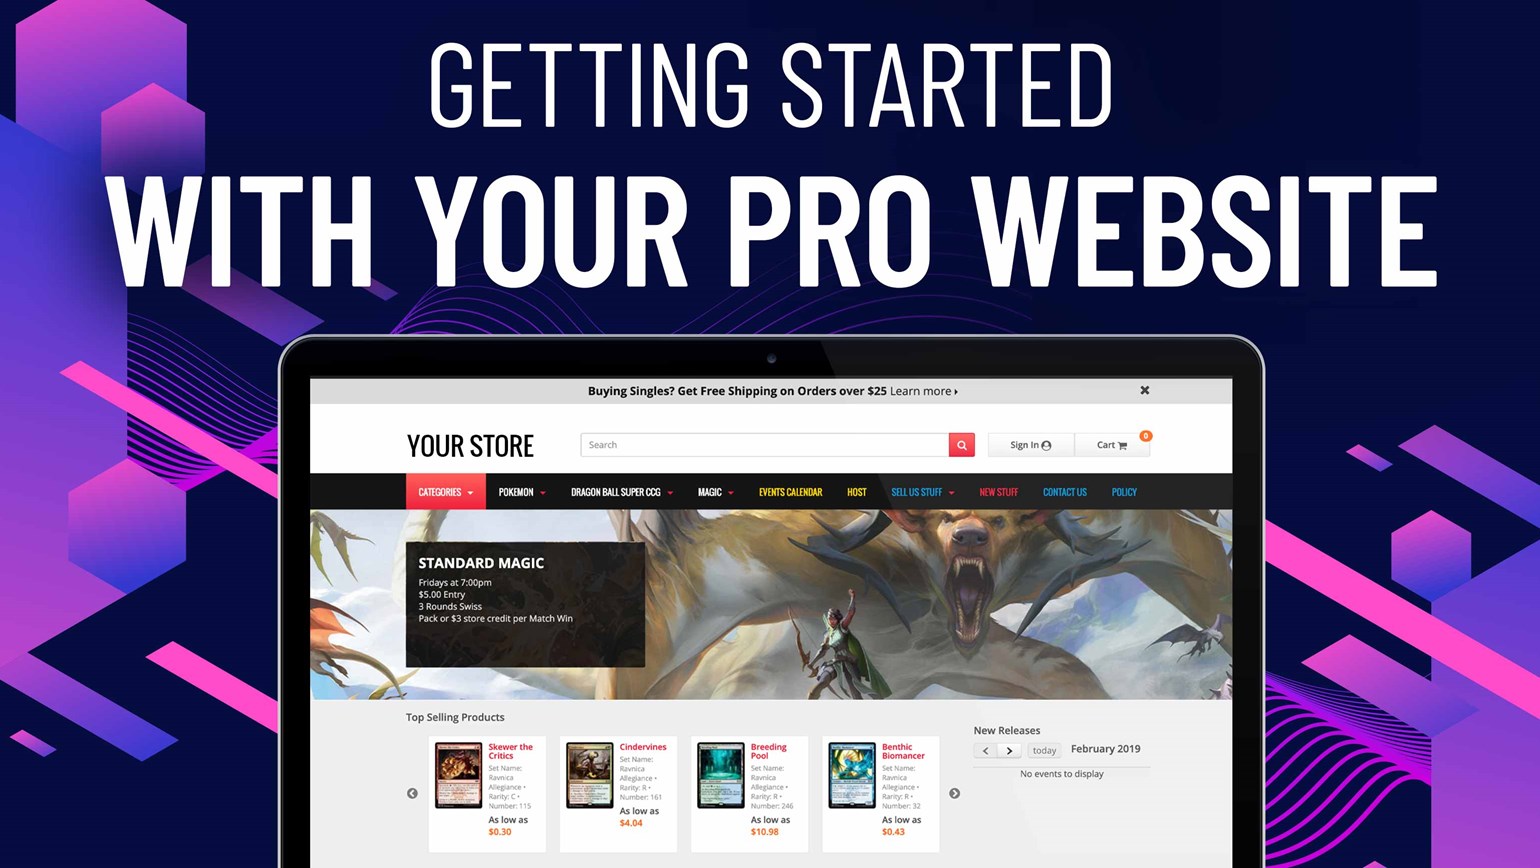 Getting Started with Your Pro Website